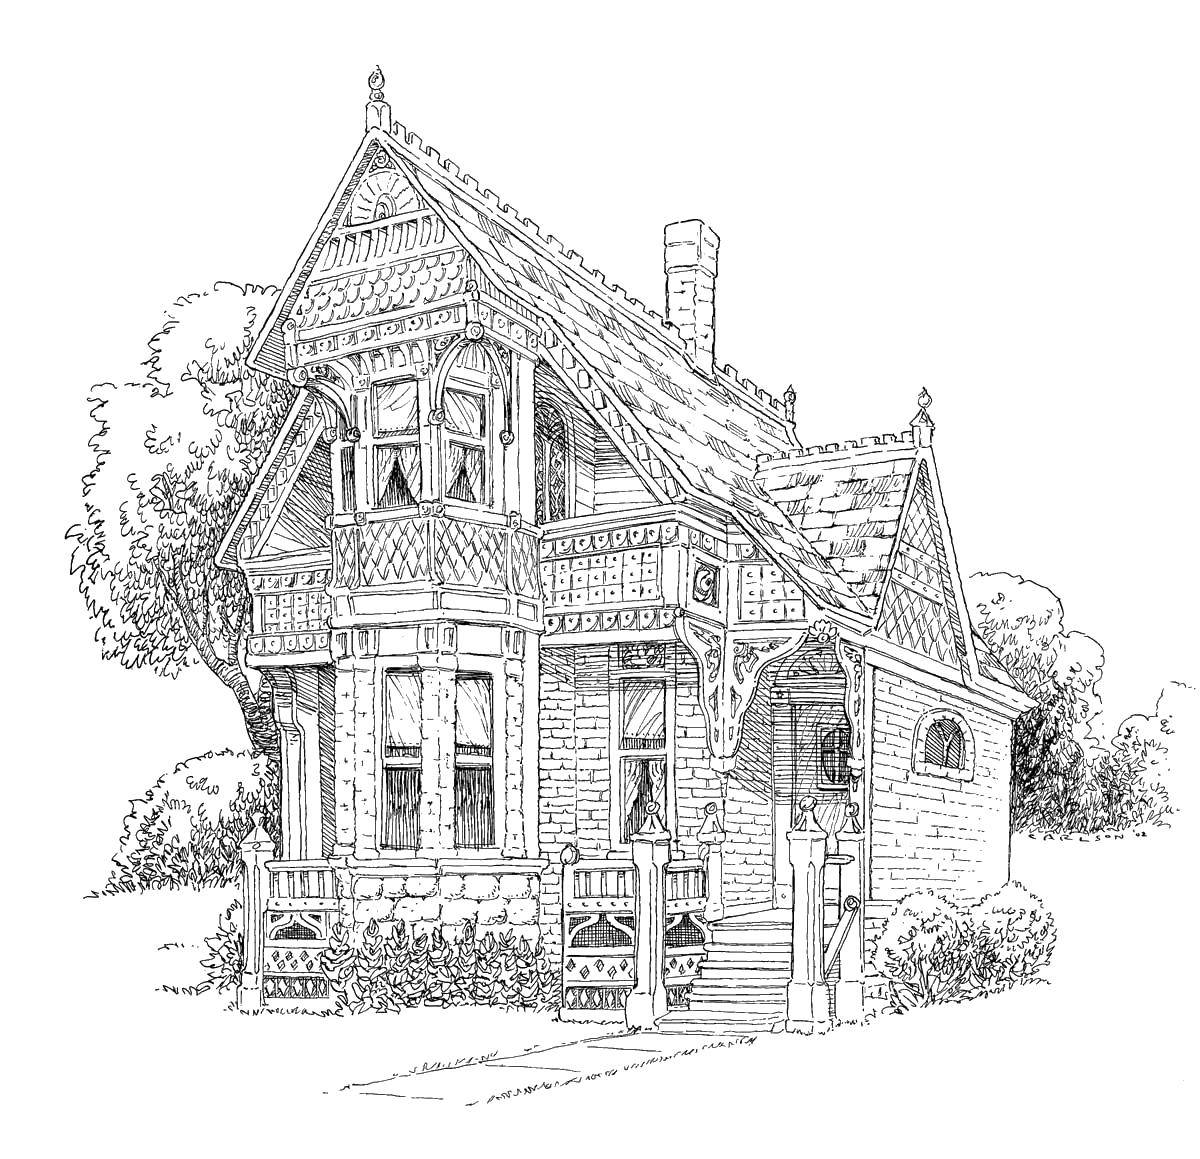 Coloring Cosy old house. Category building. Tags:  House, building.